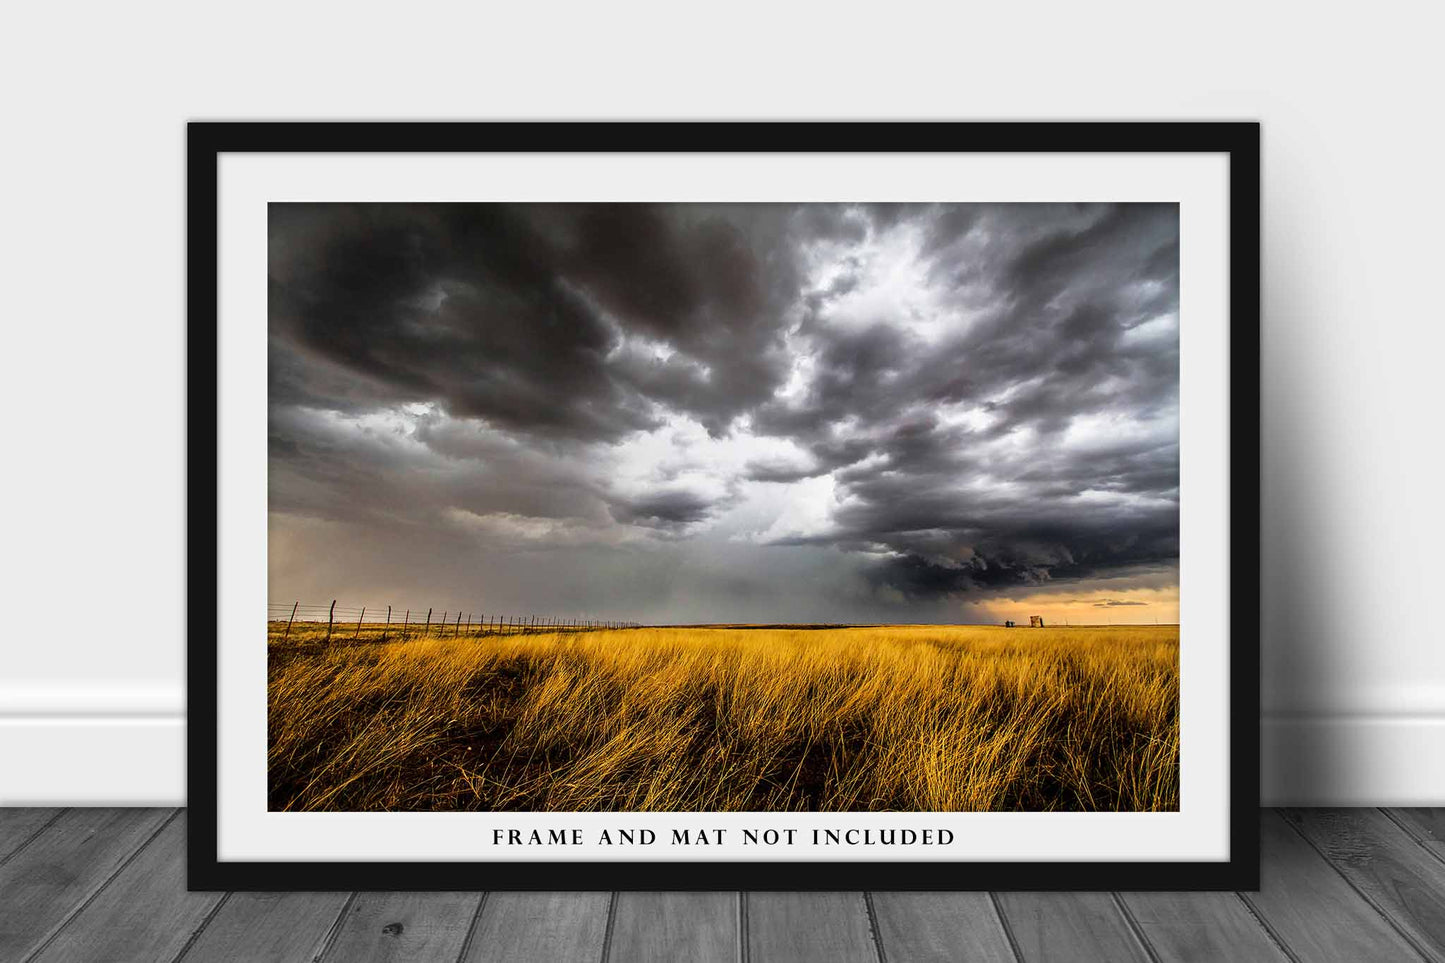 Storm Photography Art Print - Picture of Silver Sky Over Golden Prairie Grass on Stormy Day in Oklahoma Panhandle Plains Scenery Decor Photo